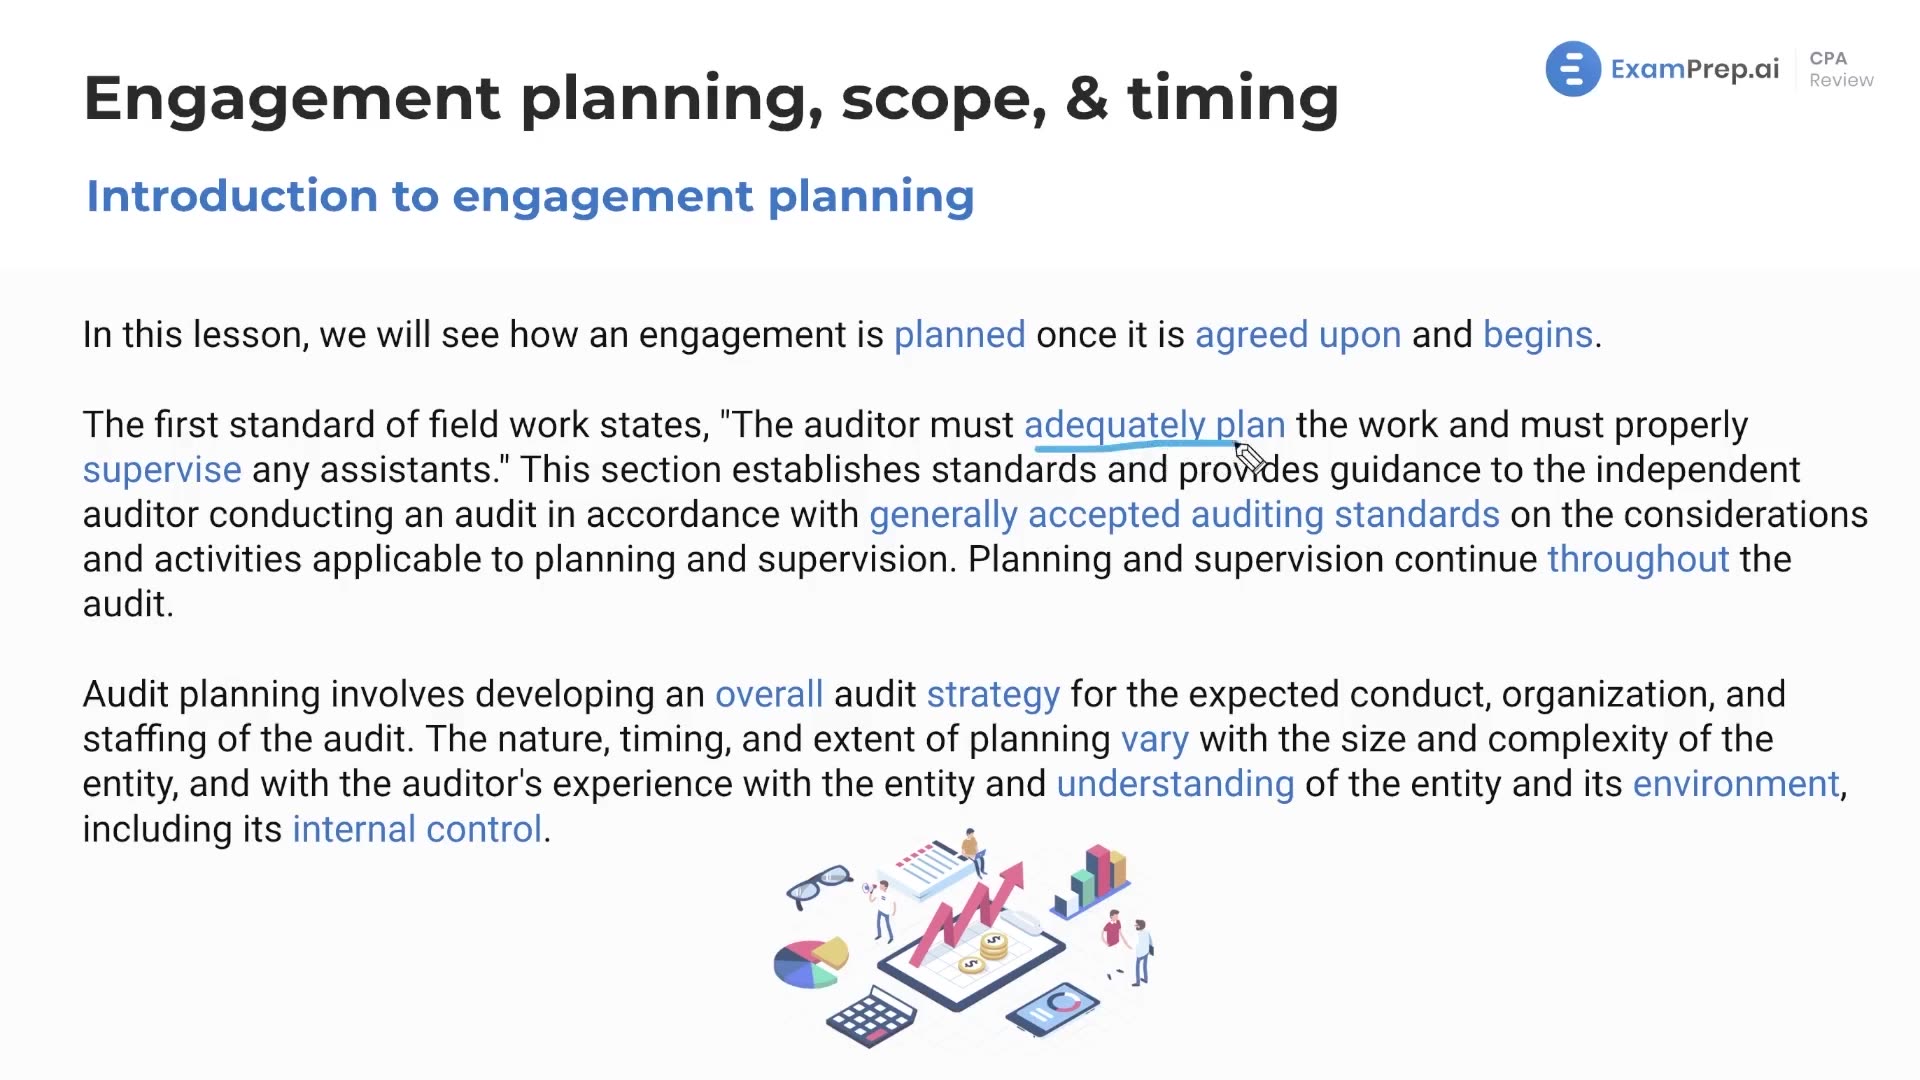 Introduction to Engagement Planning, Scope, and Timing lesson thumbnail